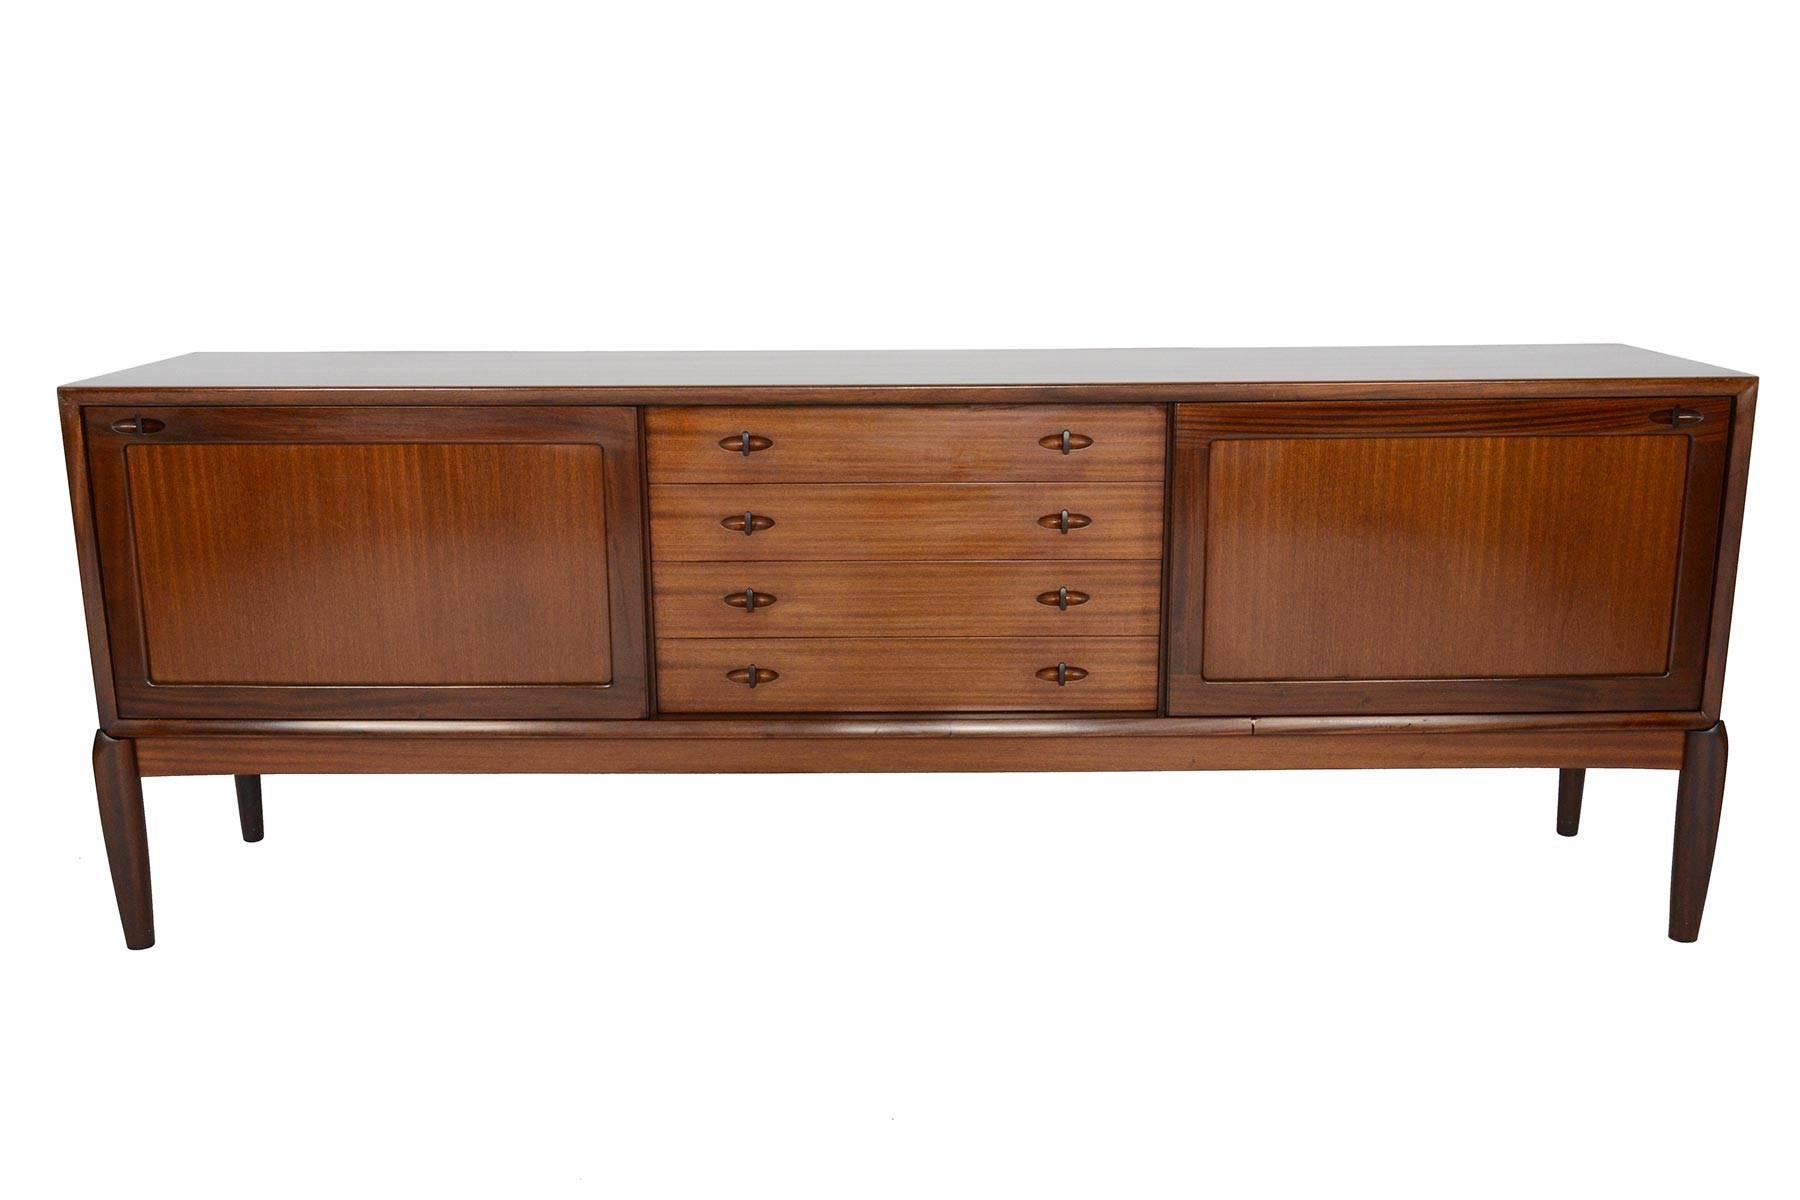 This classic Danish modern midcentury credenza was designed by H.W. Klein and manufactured by Bramin in the 1960s. Crafted in mahogany, this stately piece features two large doors which slide open to adjustable interior shelving. Four centre drawers